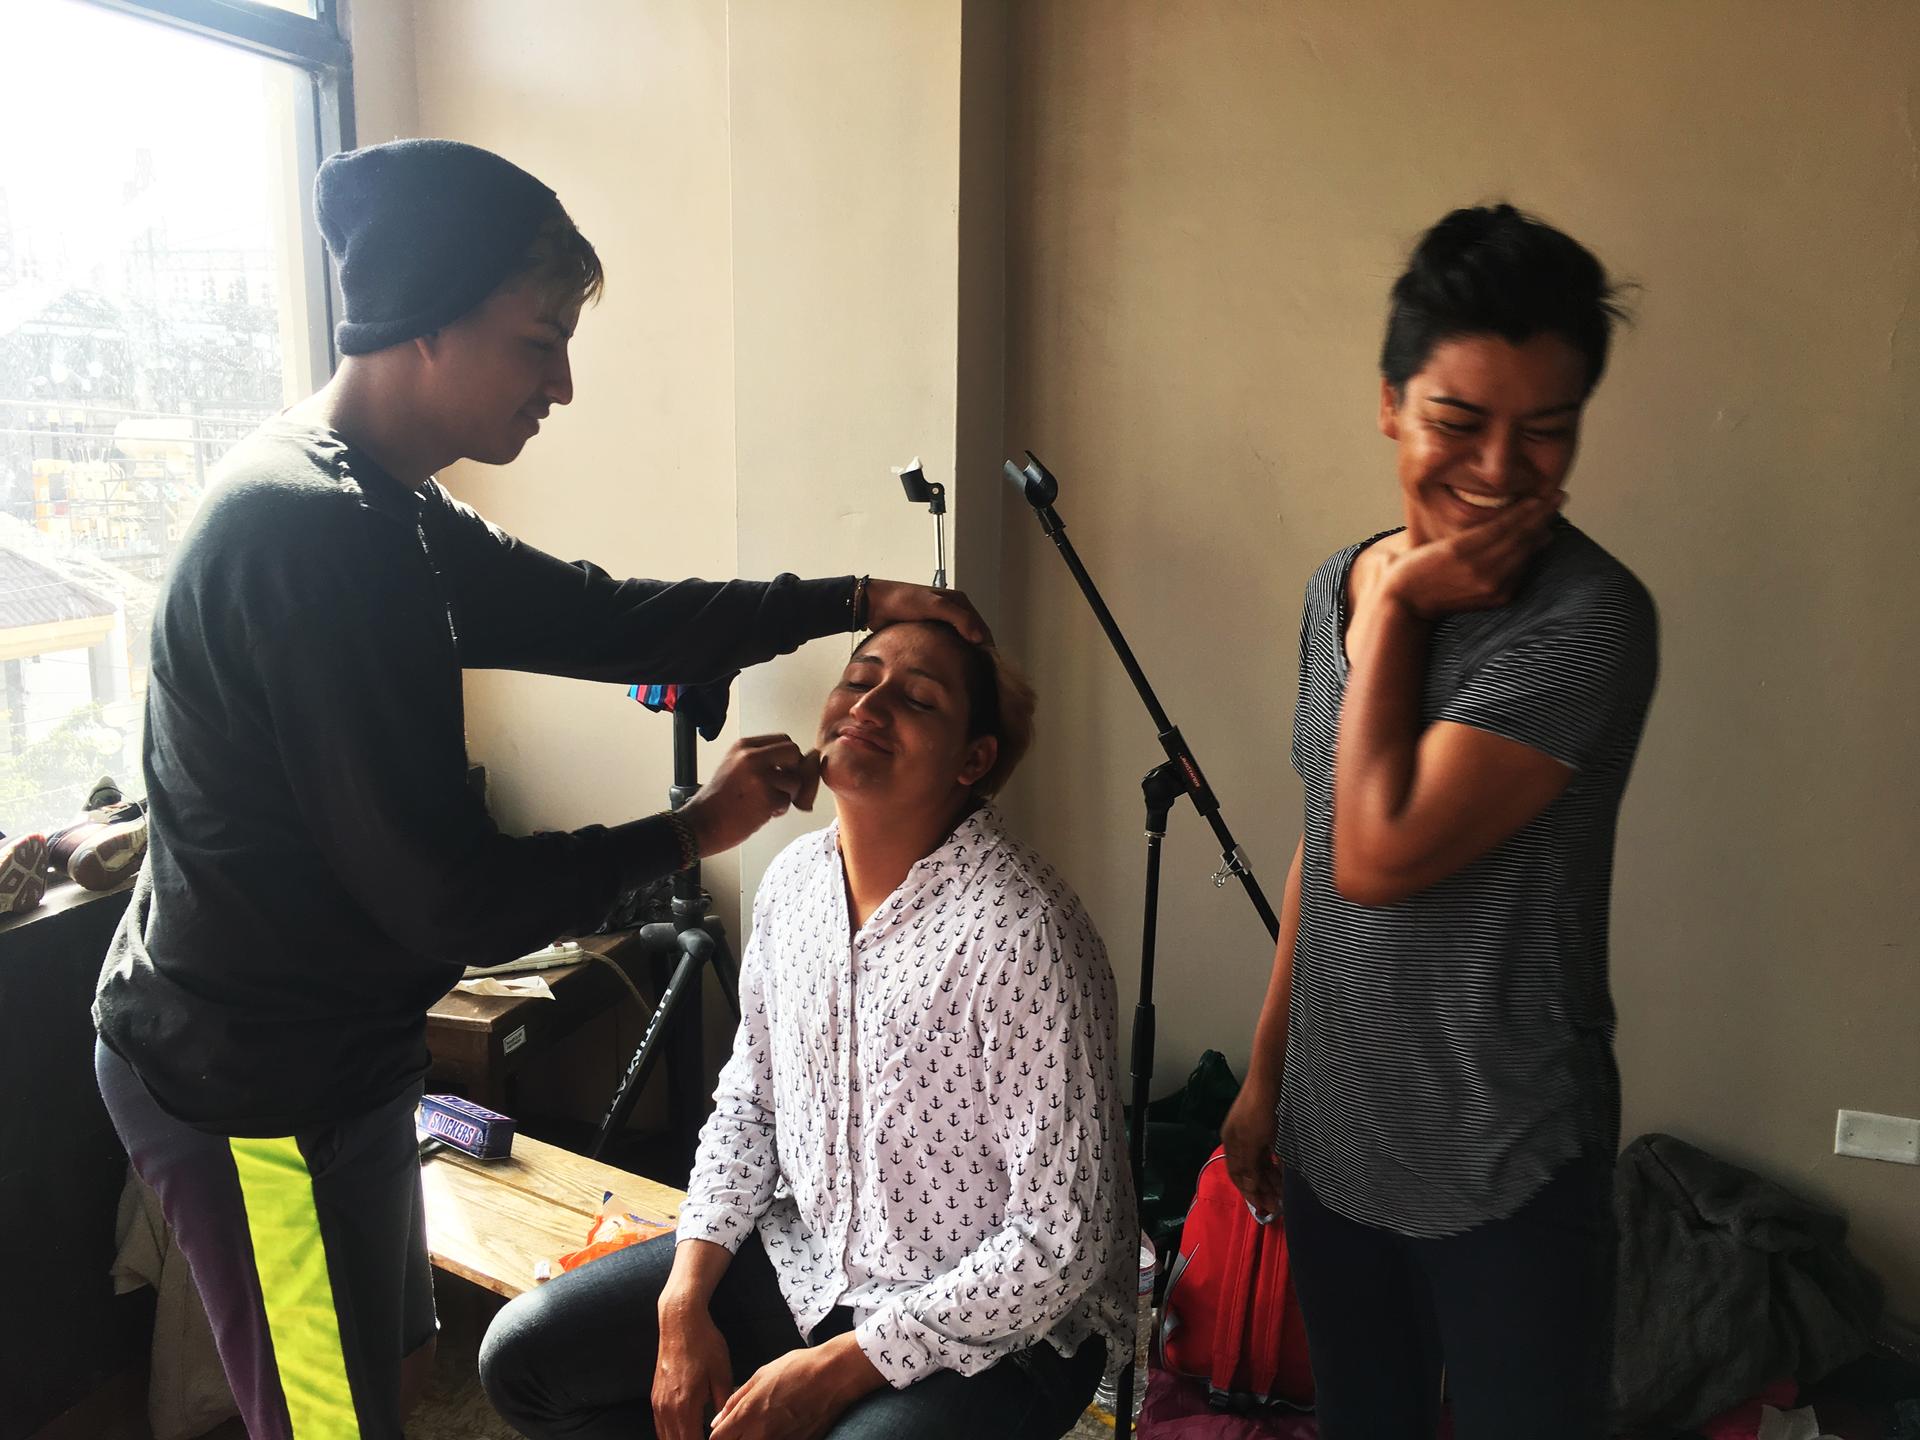 A few migrants prepare for the weddings by putting on makeup. One sits in a chair while another applies makeup and another giggles in the corner